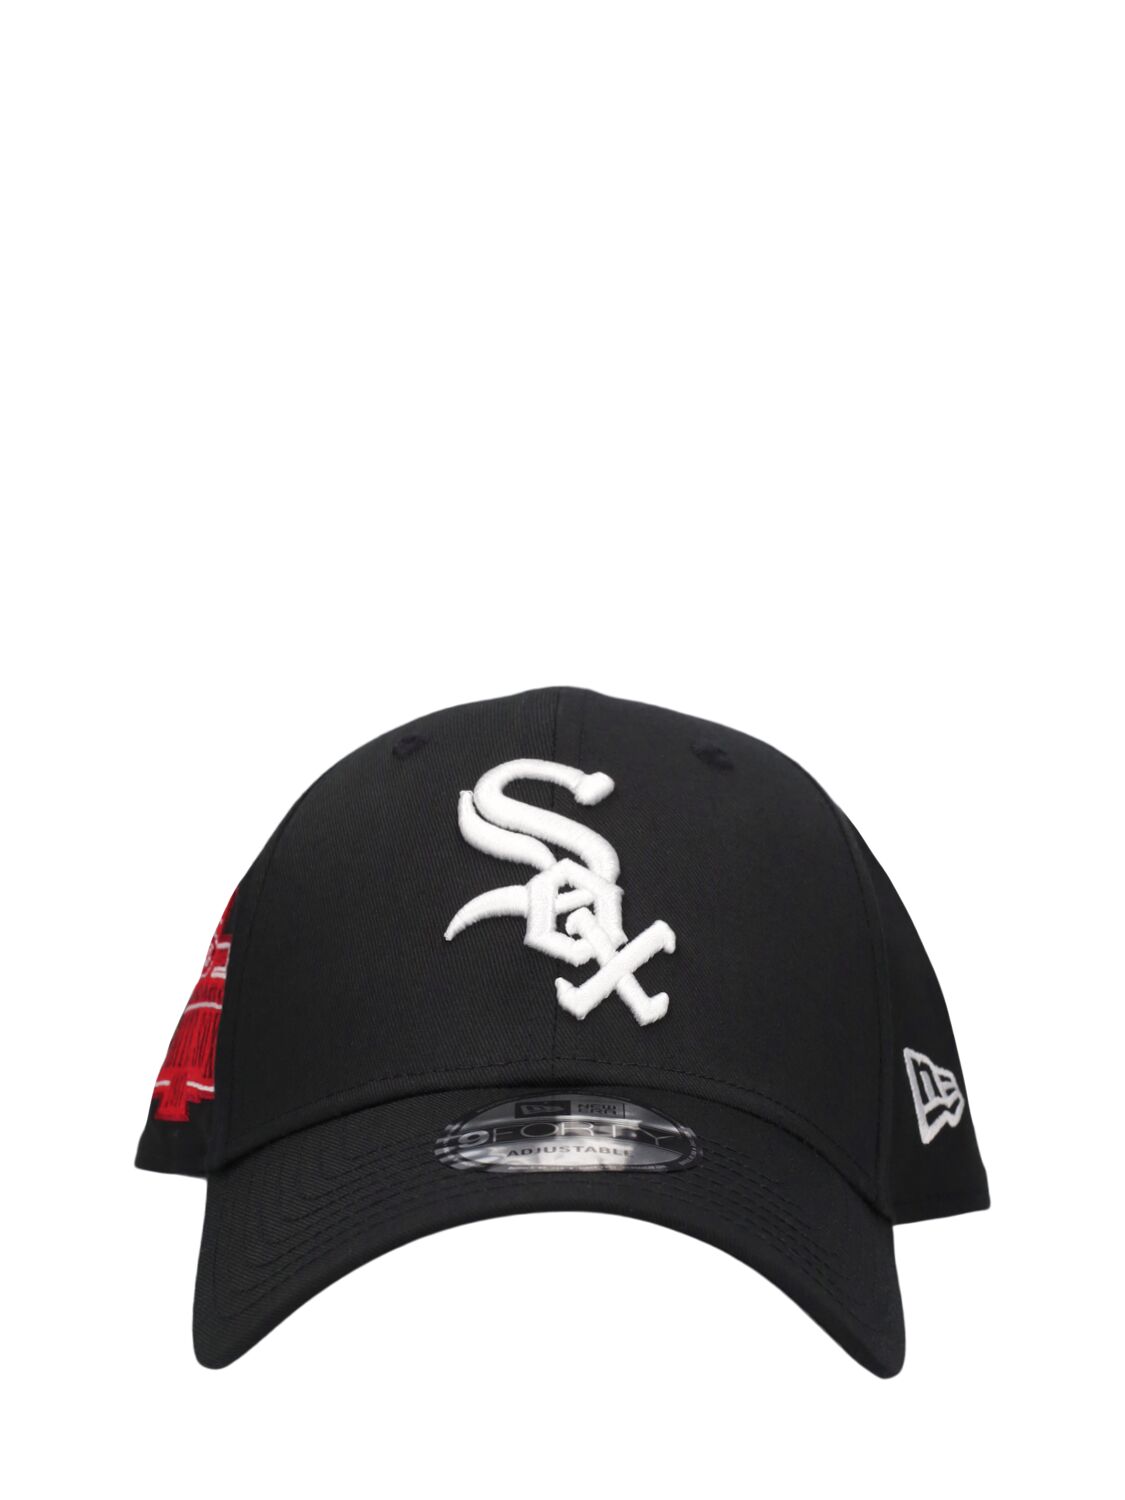 Chicago White Sox 9forty Cap